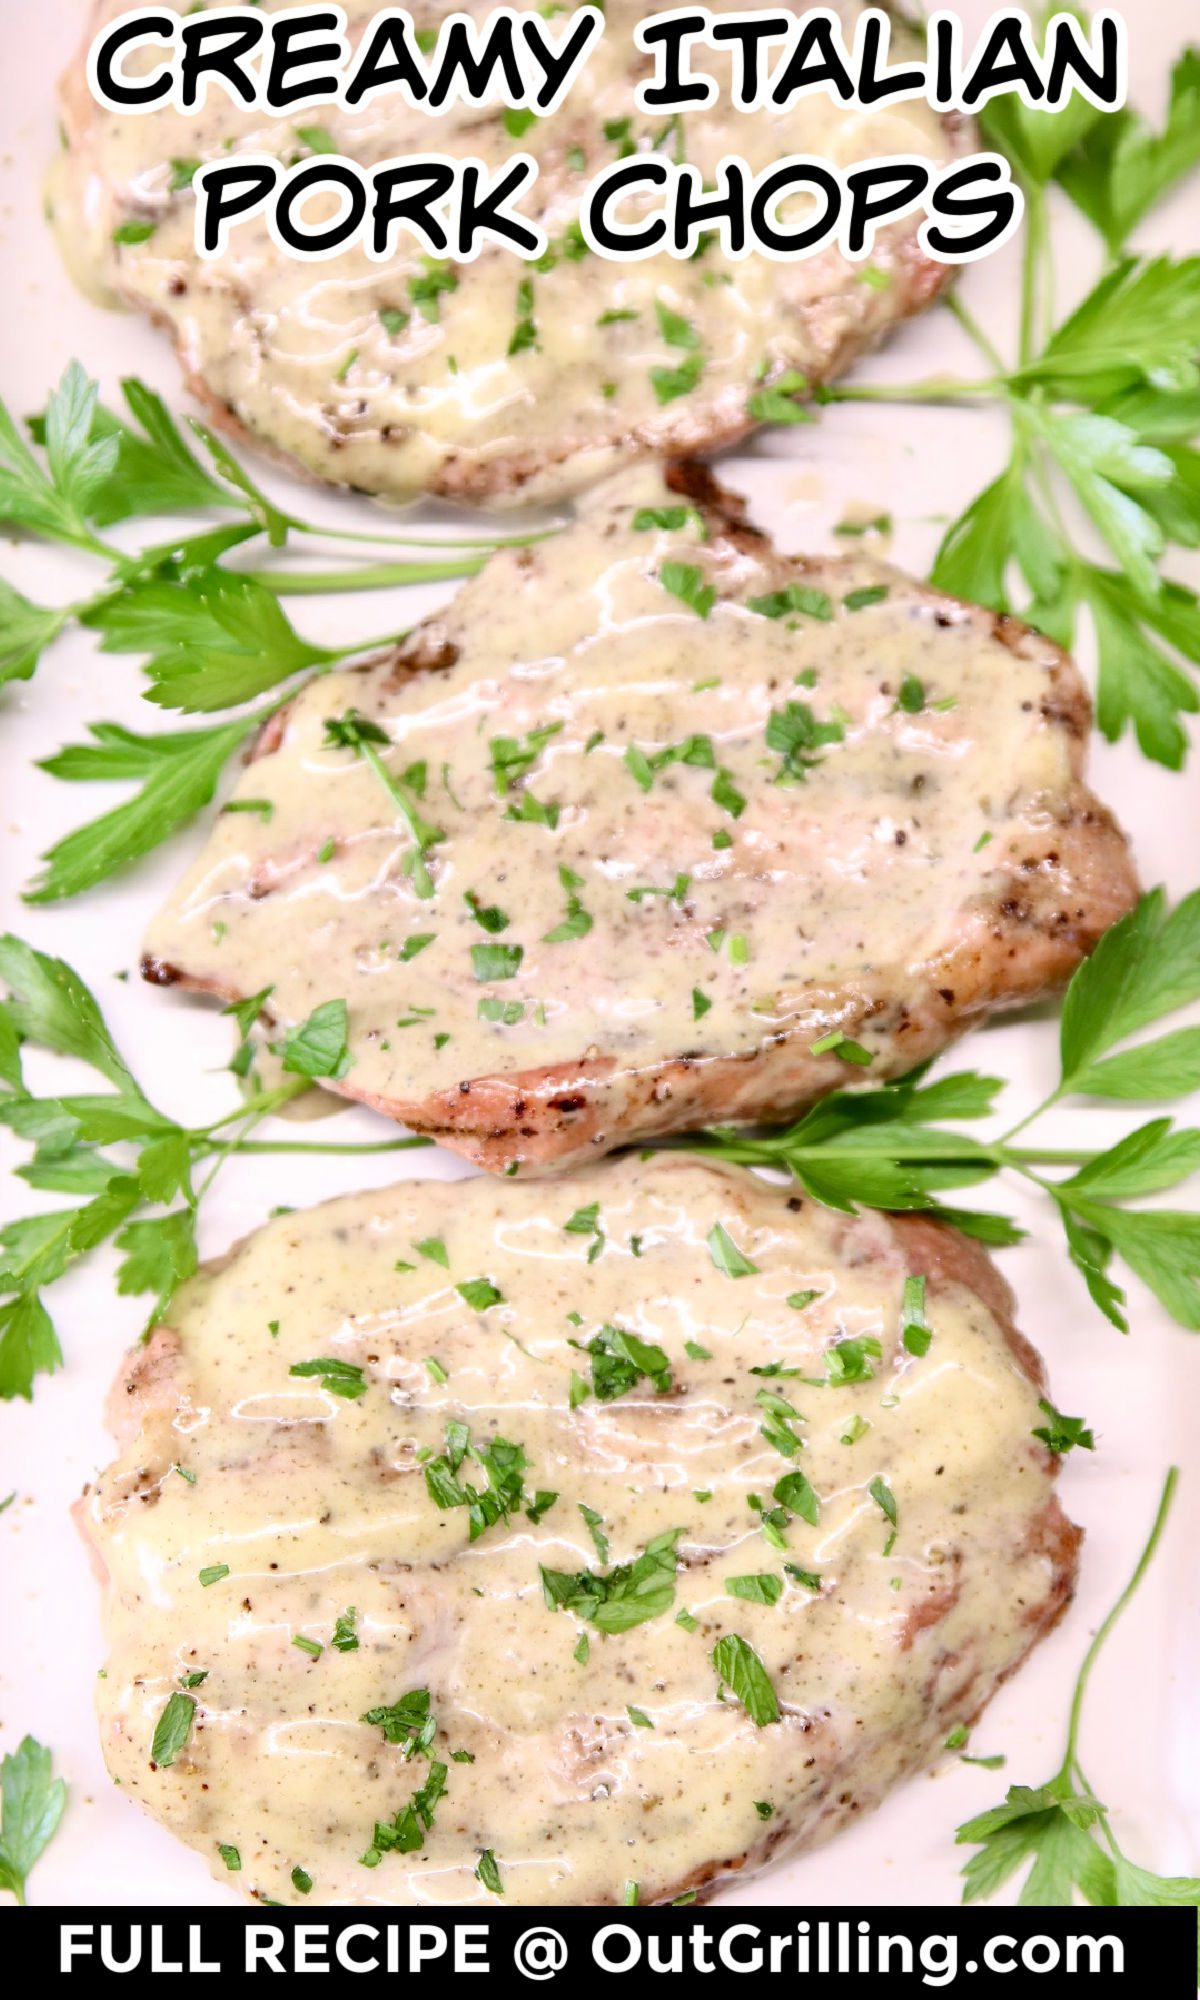 Grilling Creamy Italian Pork Chops Recipe - Out Grilling